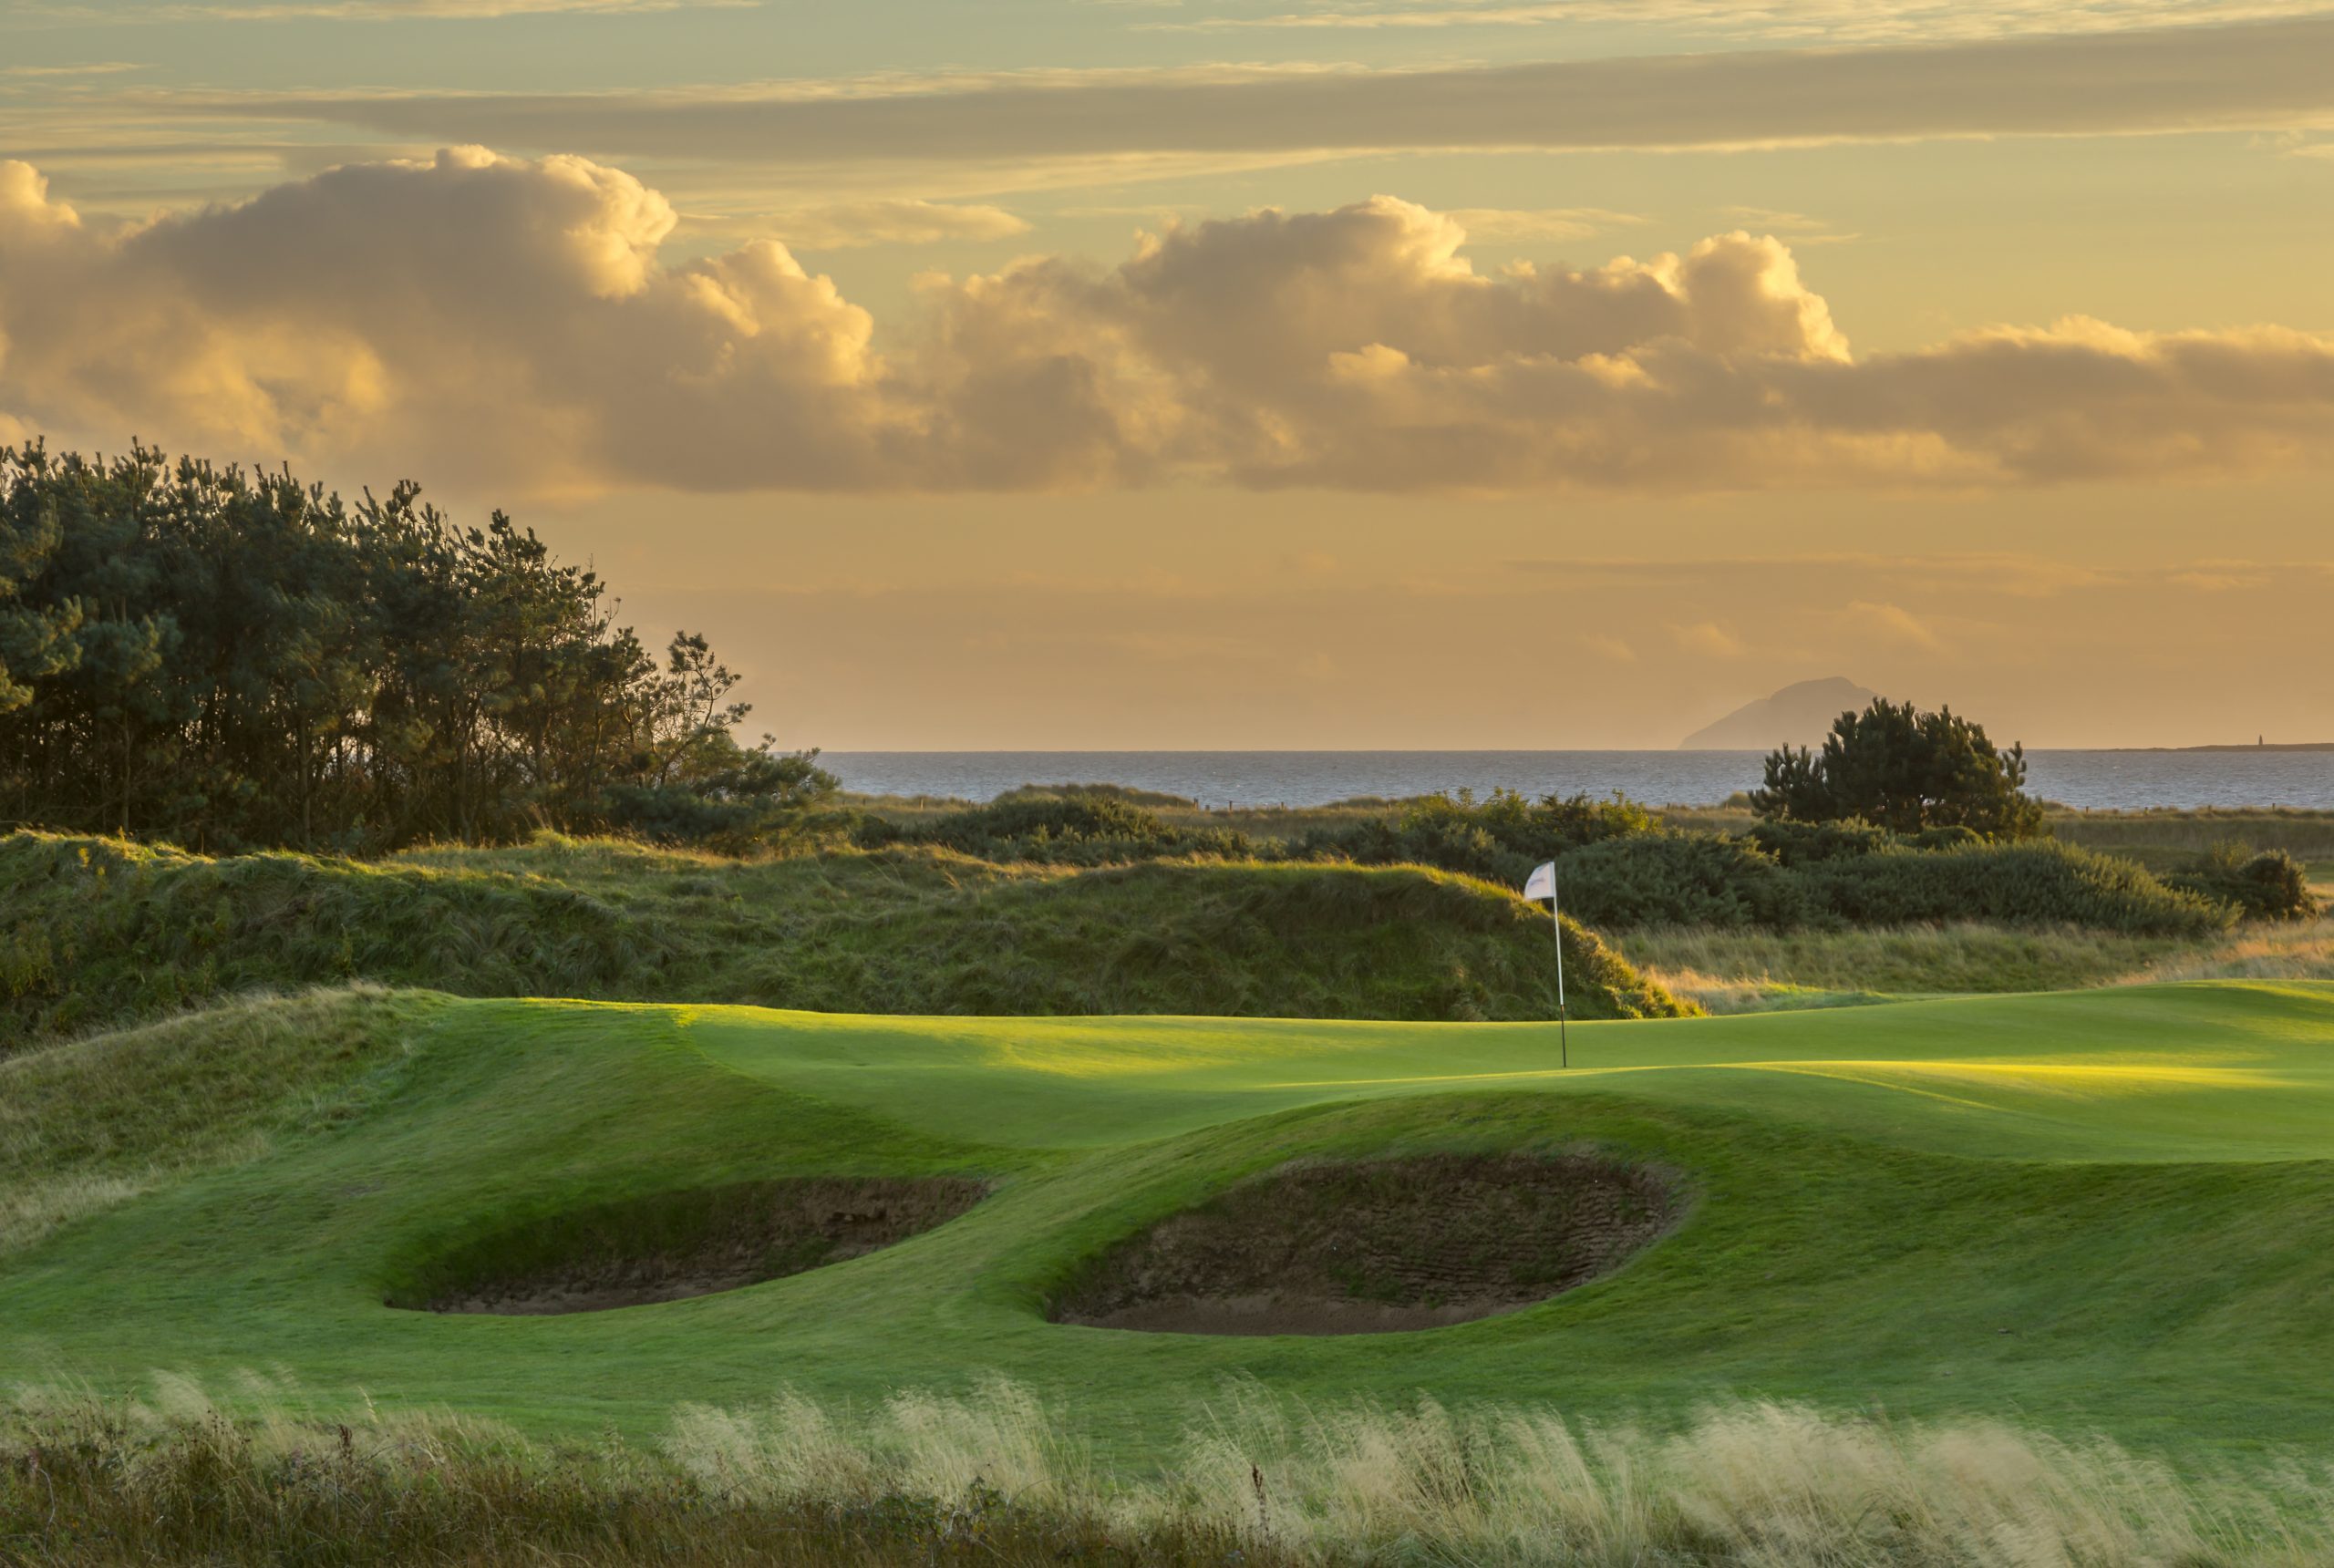 The stunning UK seaside town with beautiful views, huge lodges and famous golfers